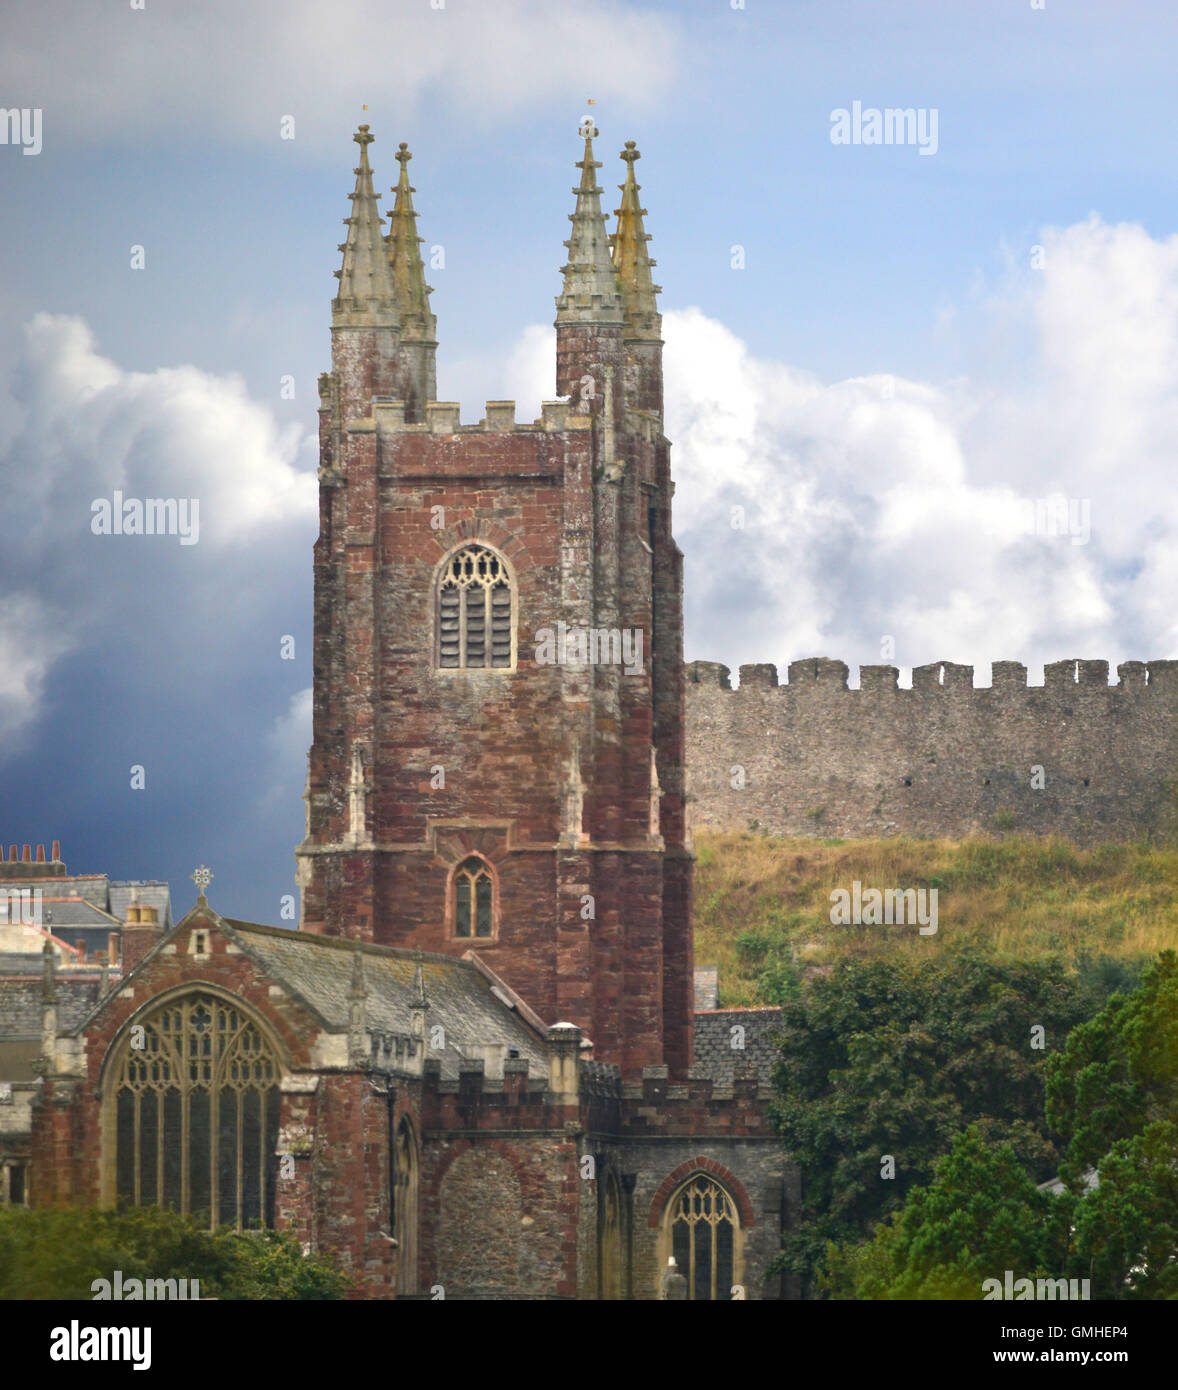 St. Mary's Church Totnes, with the Castle in background, Devon, England. Stock Photo